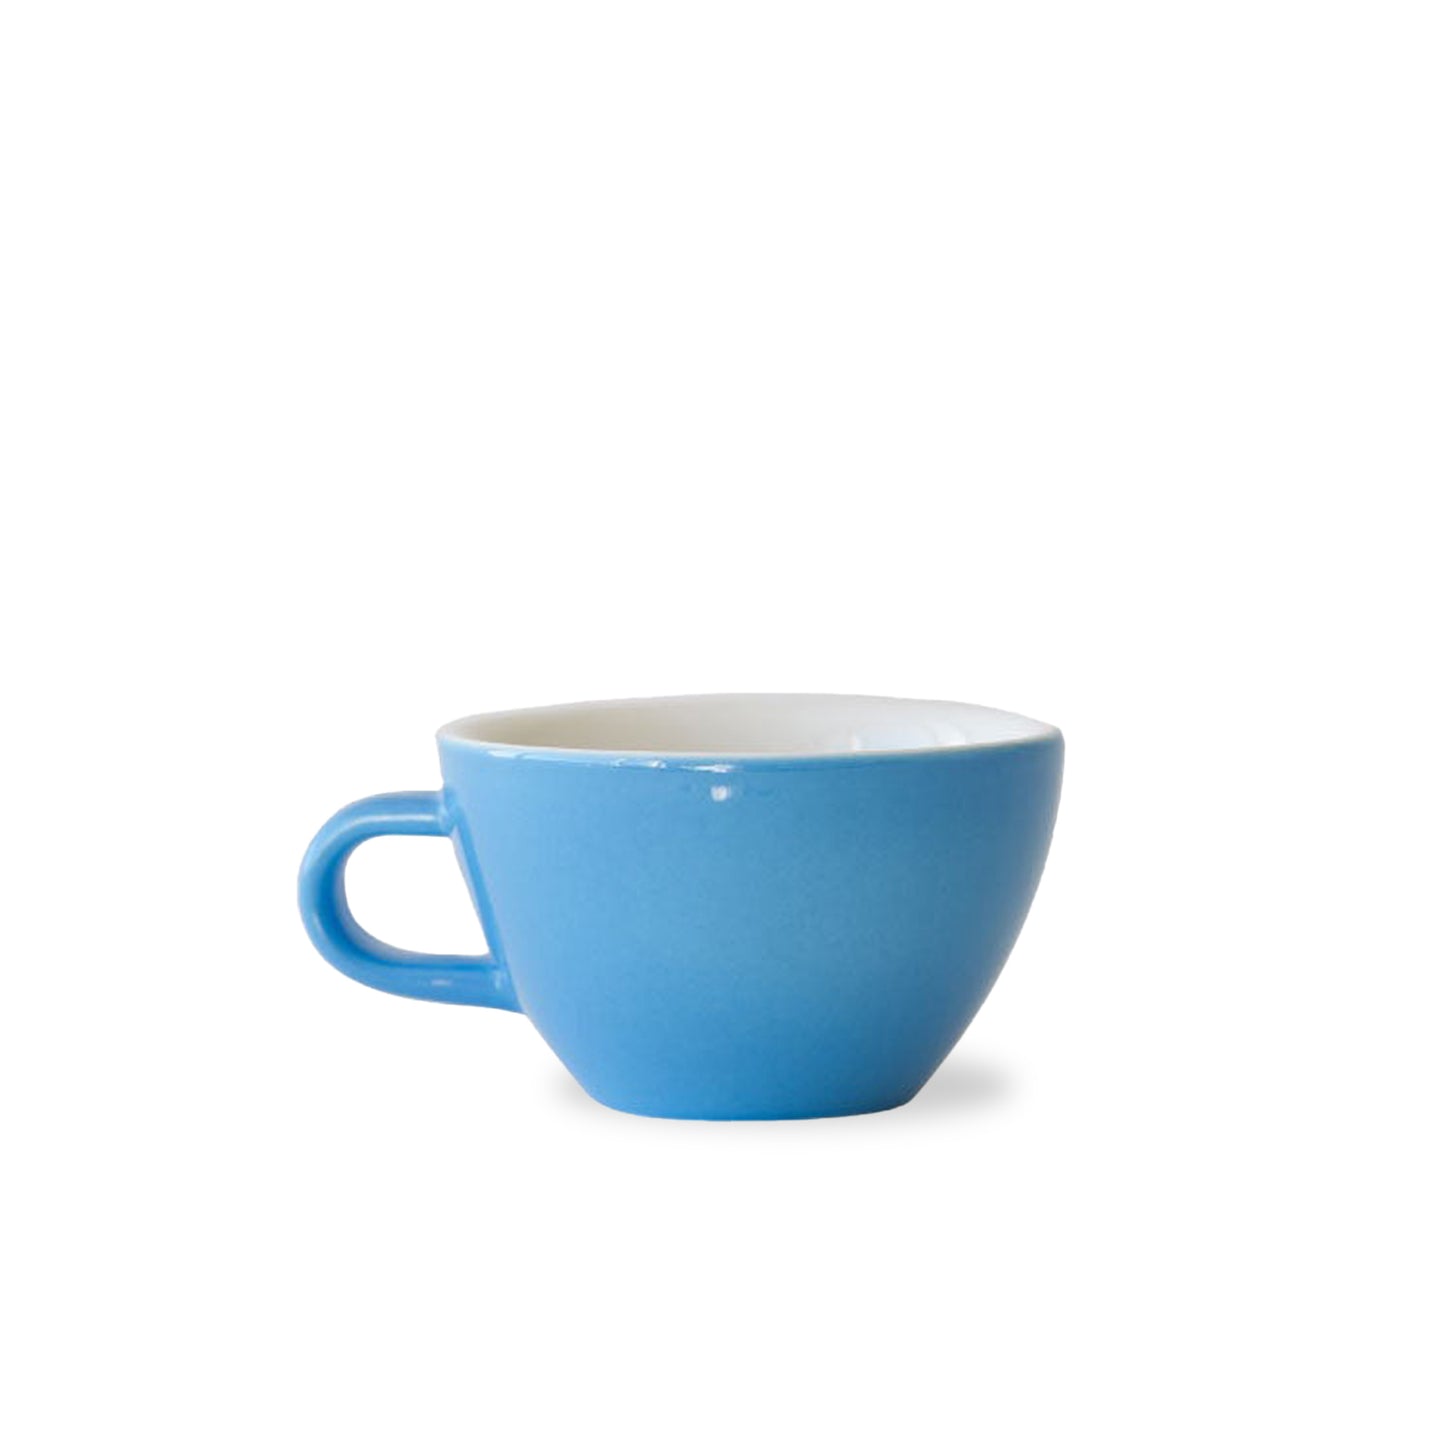 ACME Evo Cappuccino Cup + Saucer 190ml (Pack of 6)